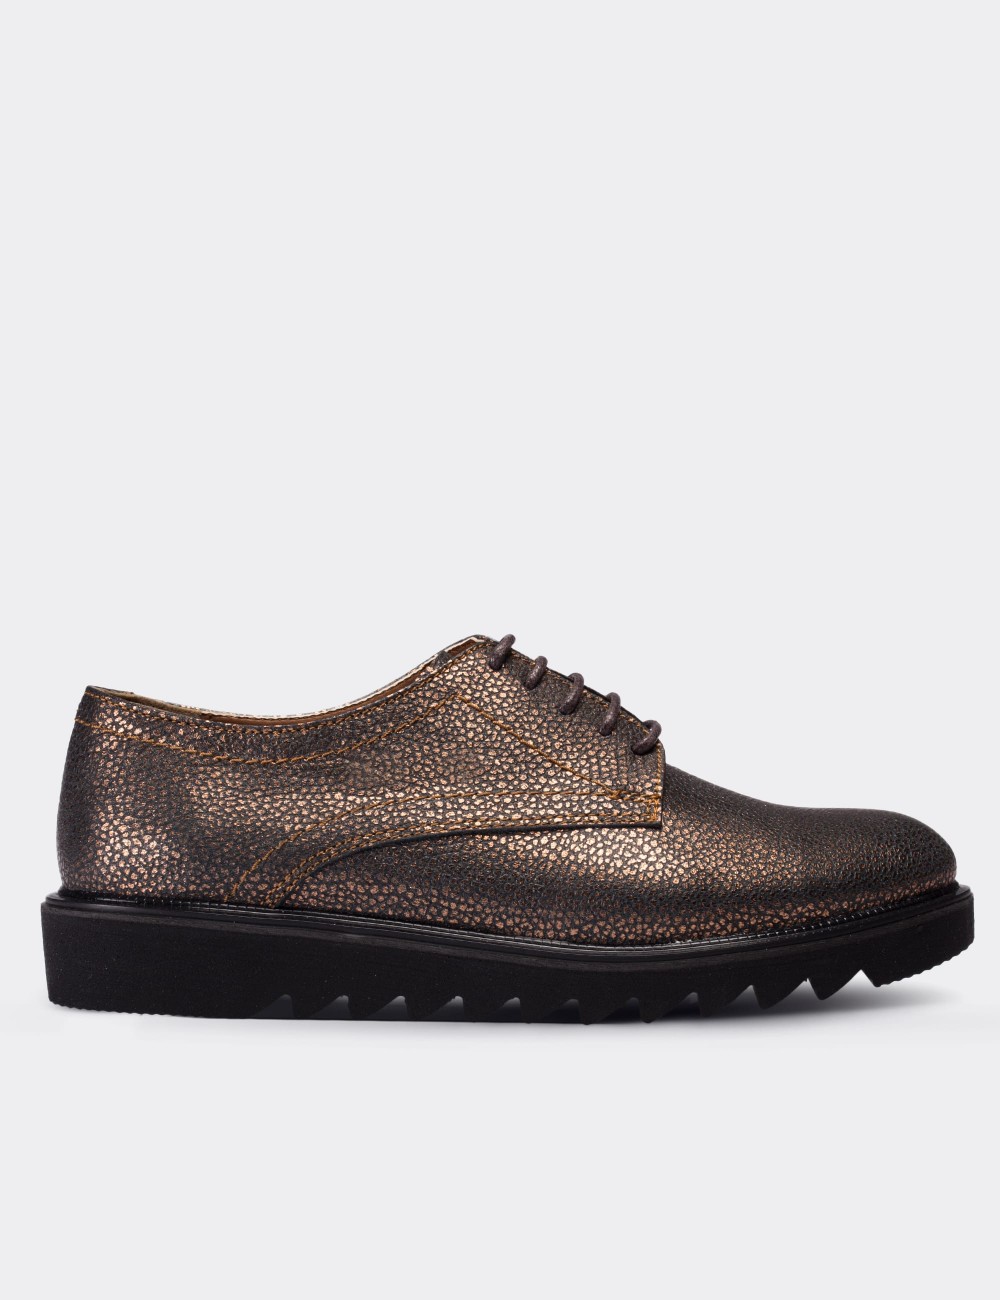 Copper  Leather Lace-up Oxford Shoes - 01430ZBKRE02